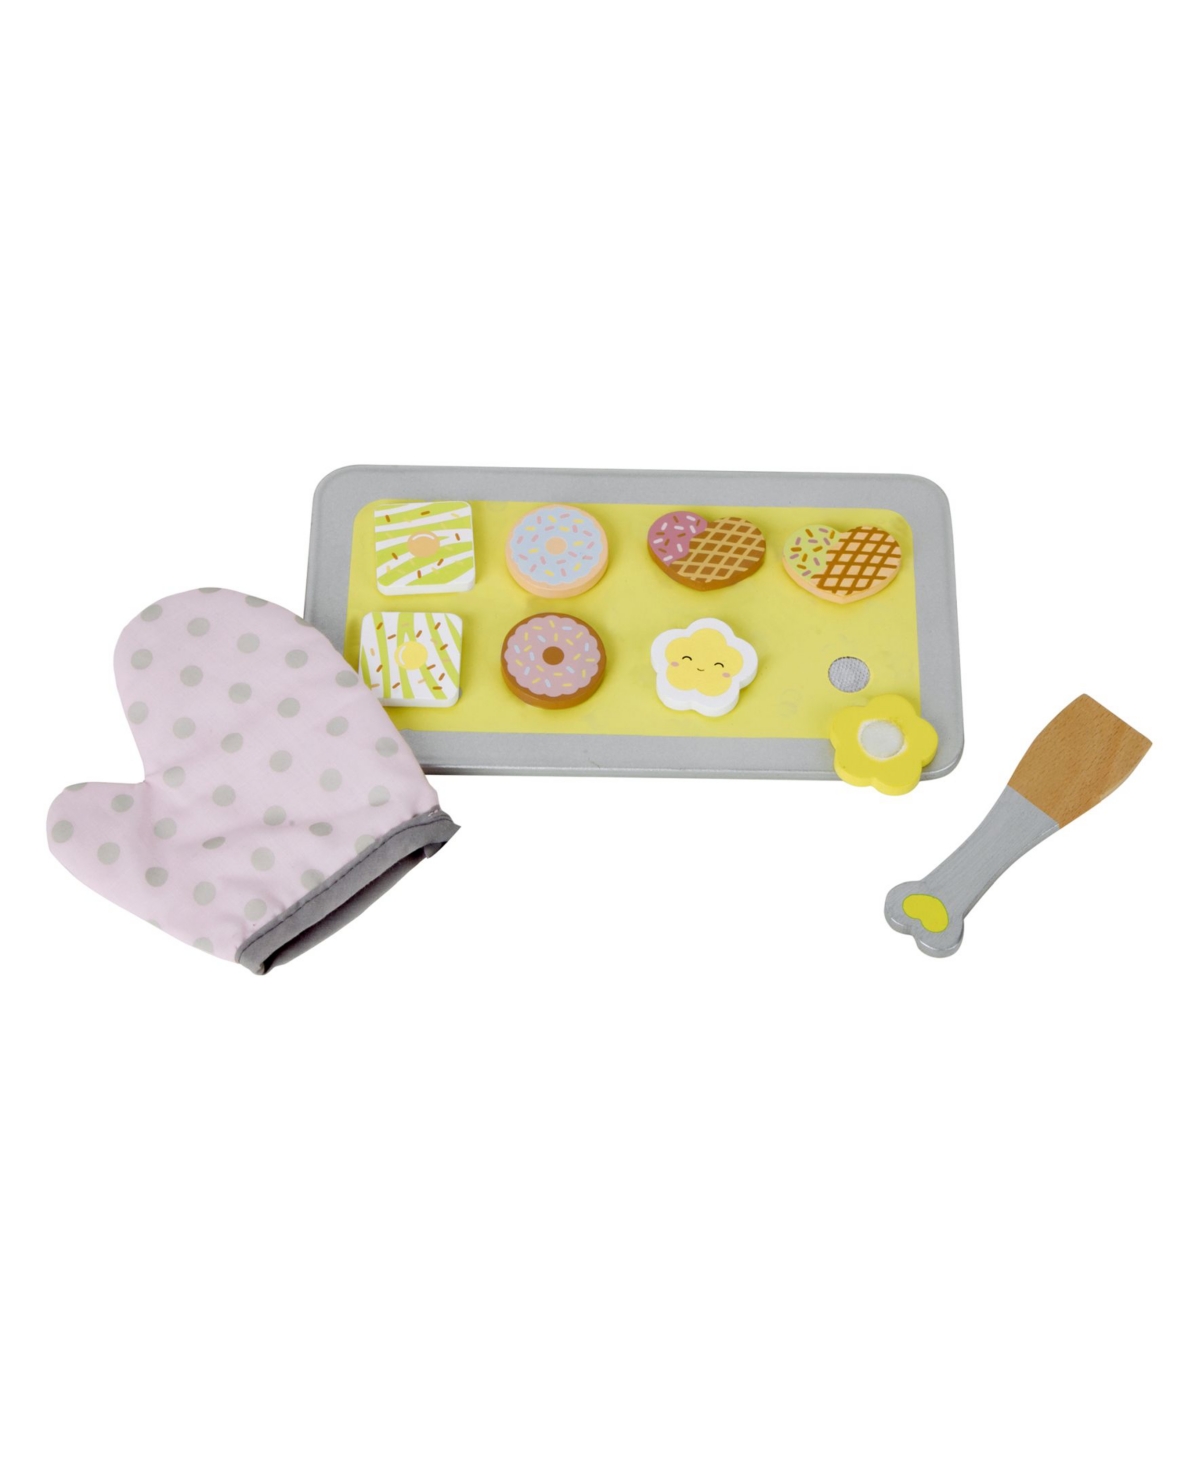 Classic Toy Kids' Biscuit Baking Set, 11 Pieces In Multi